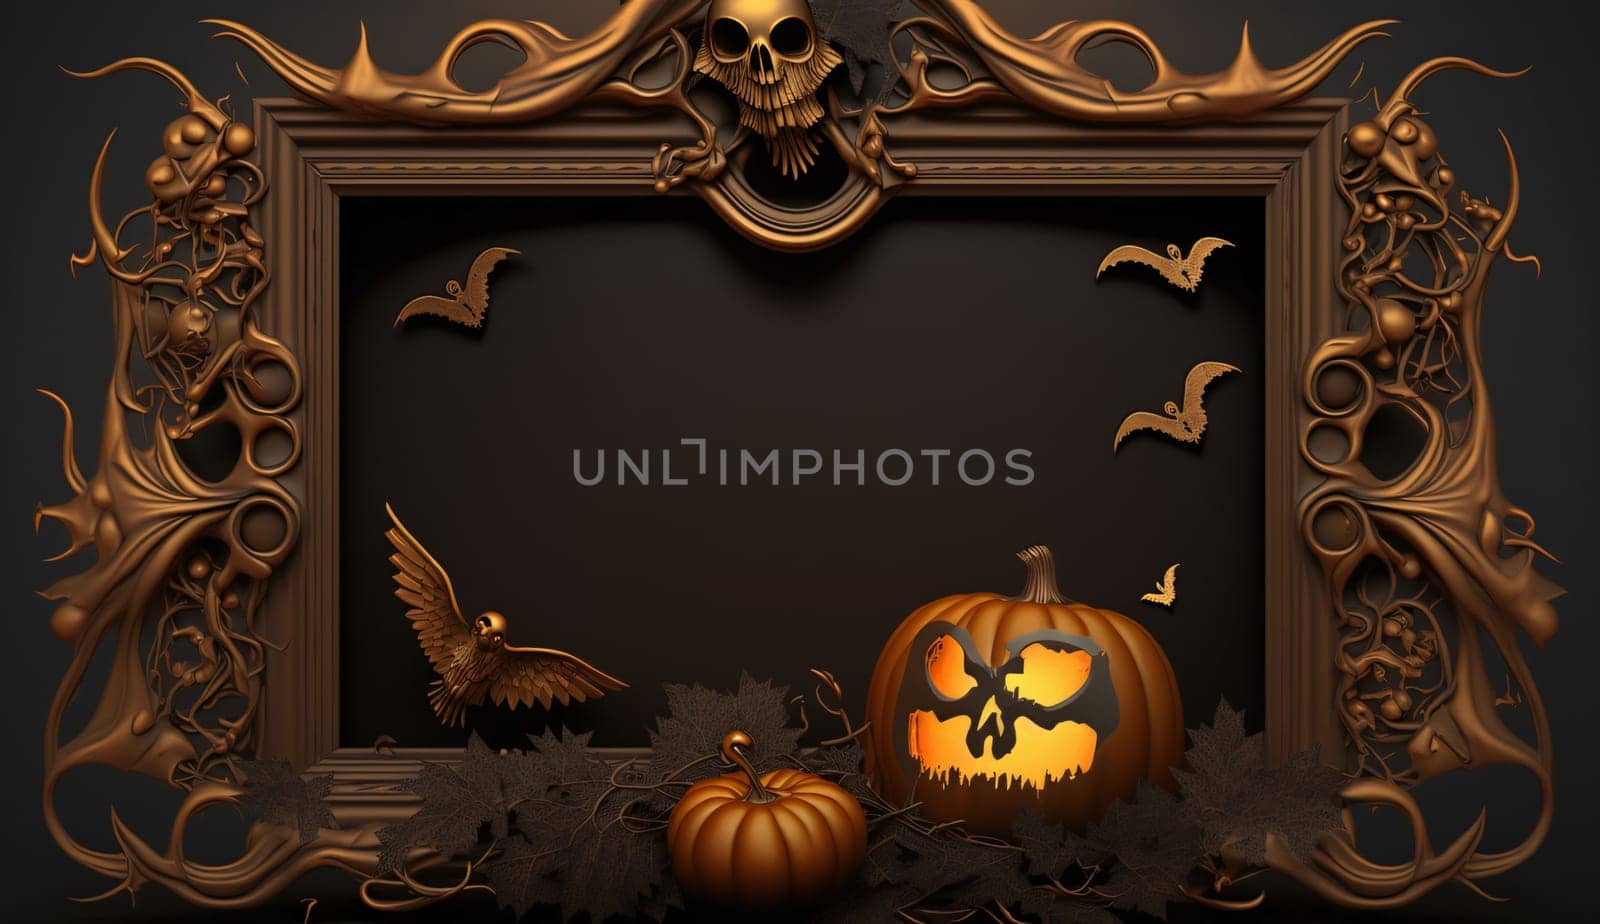 Decorated frame in the middle, space for your own content, board decorated with jack-o-lanterns. by ThemesS